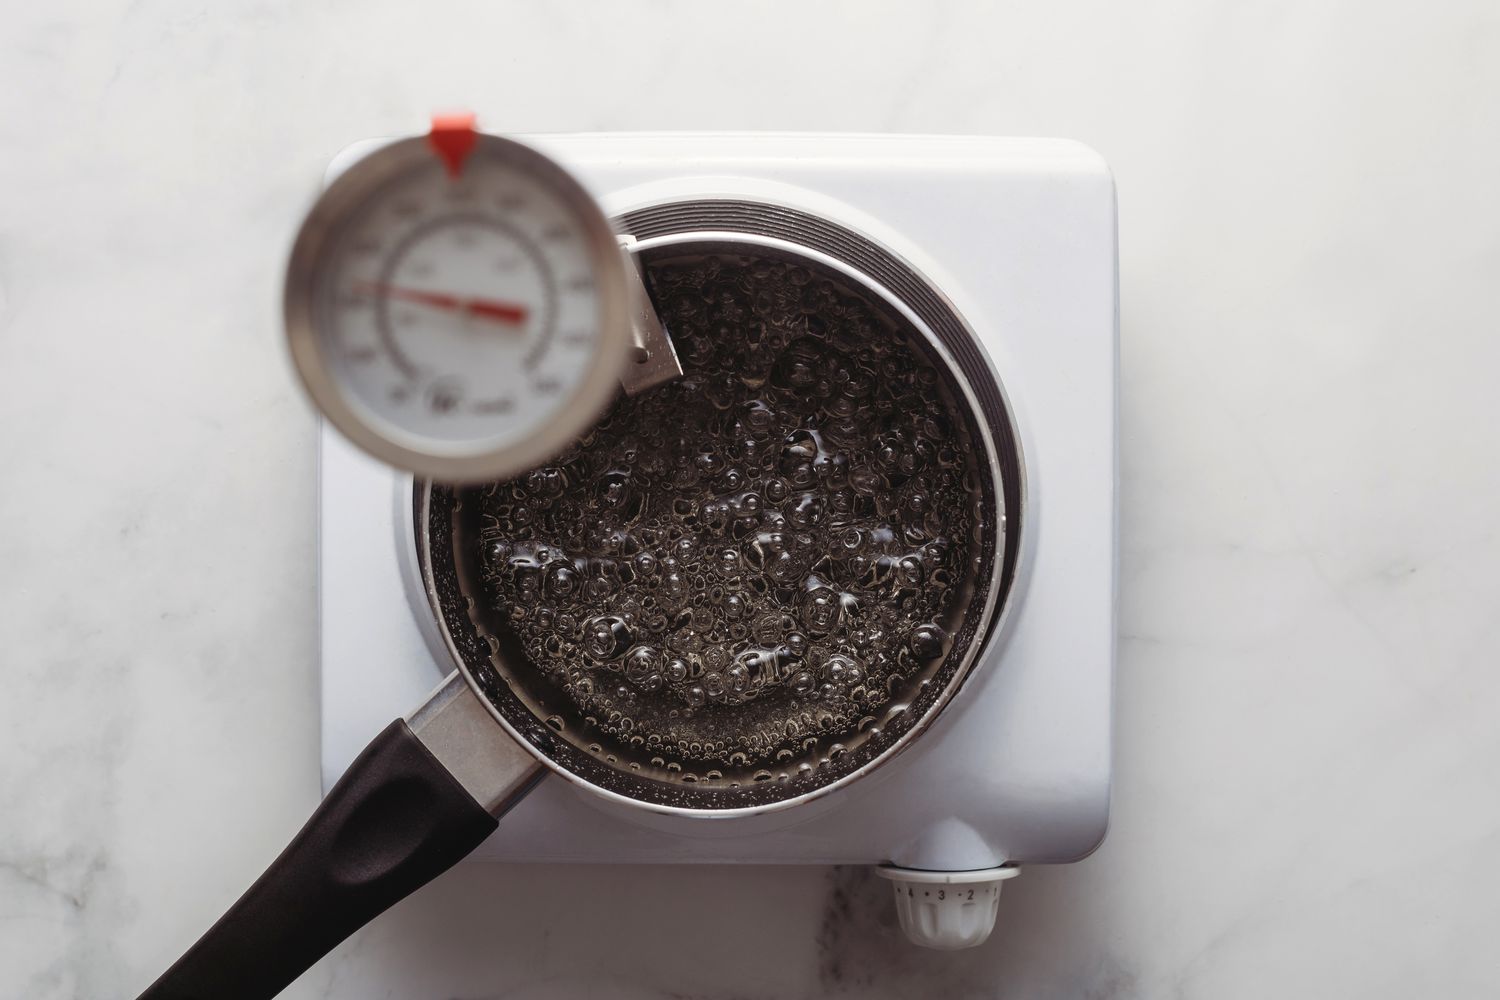 Candy thermometer measuring boiling syrup temperature in a saucepan